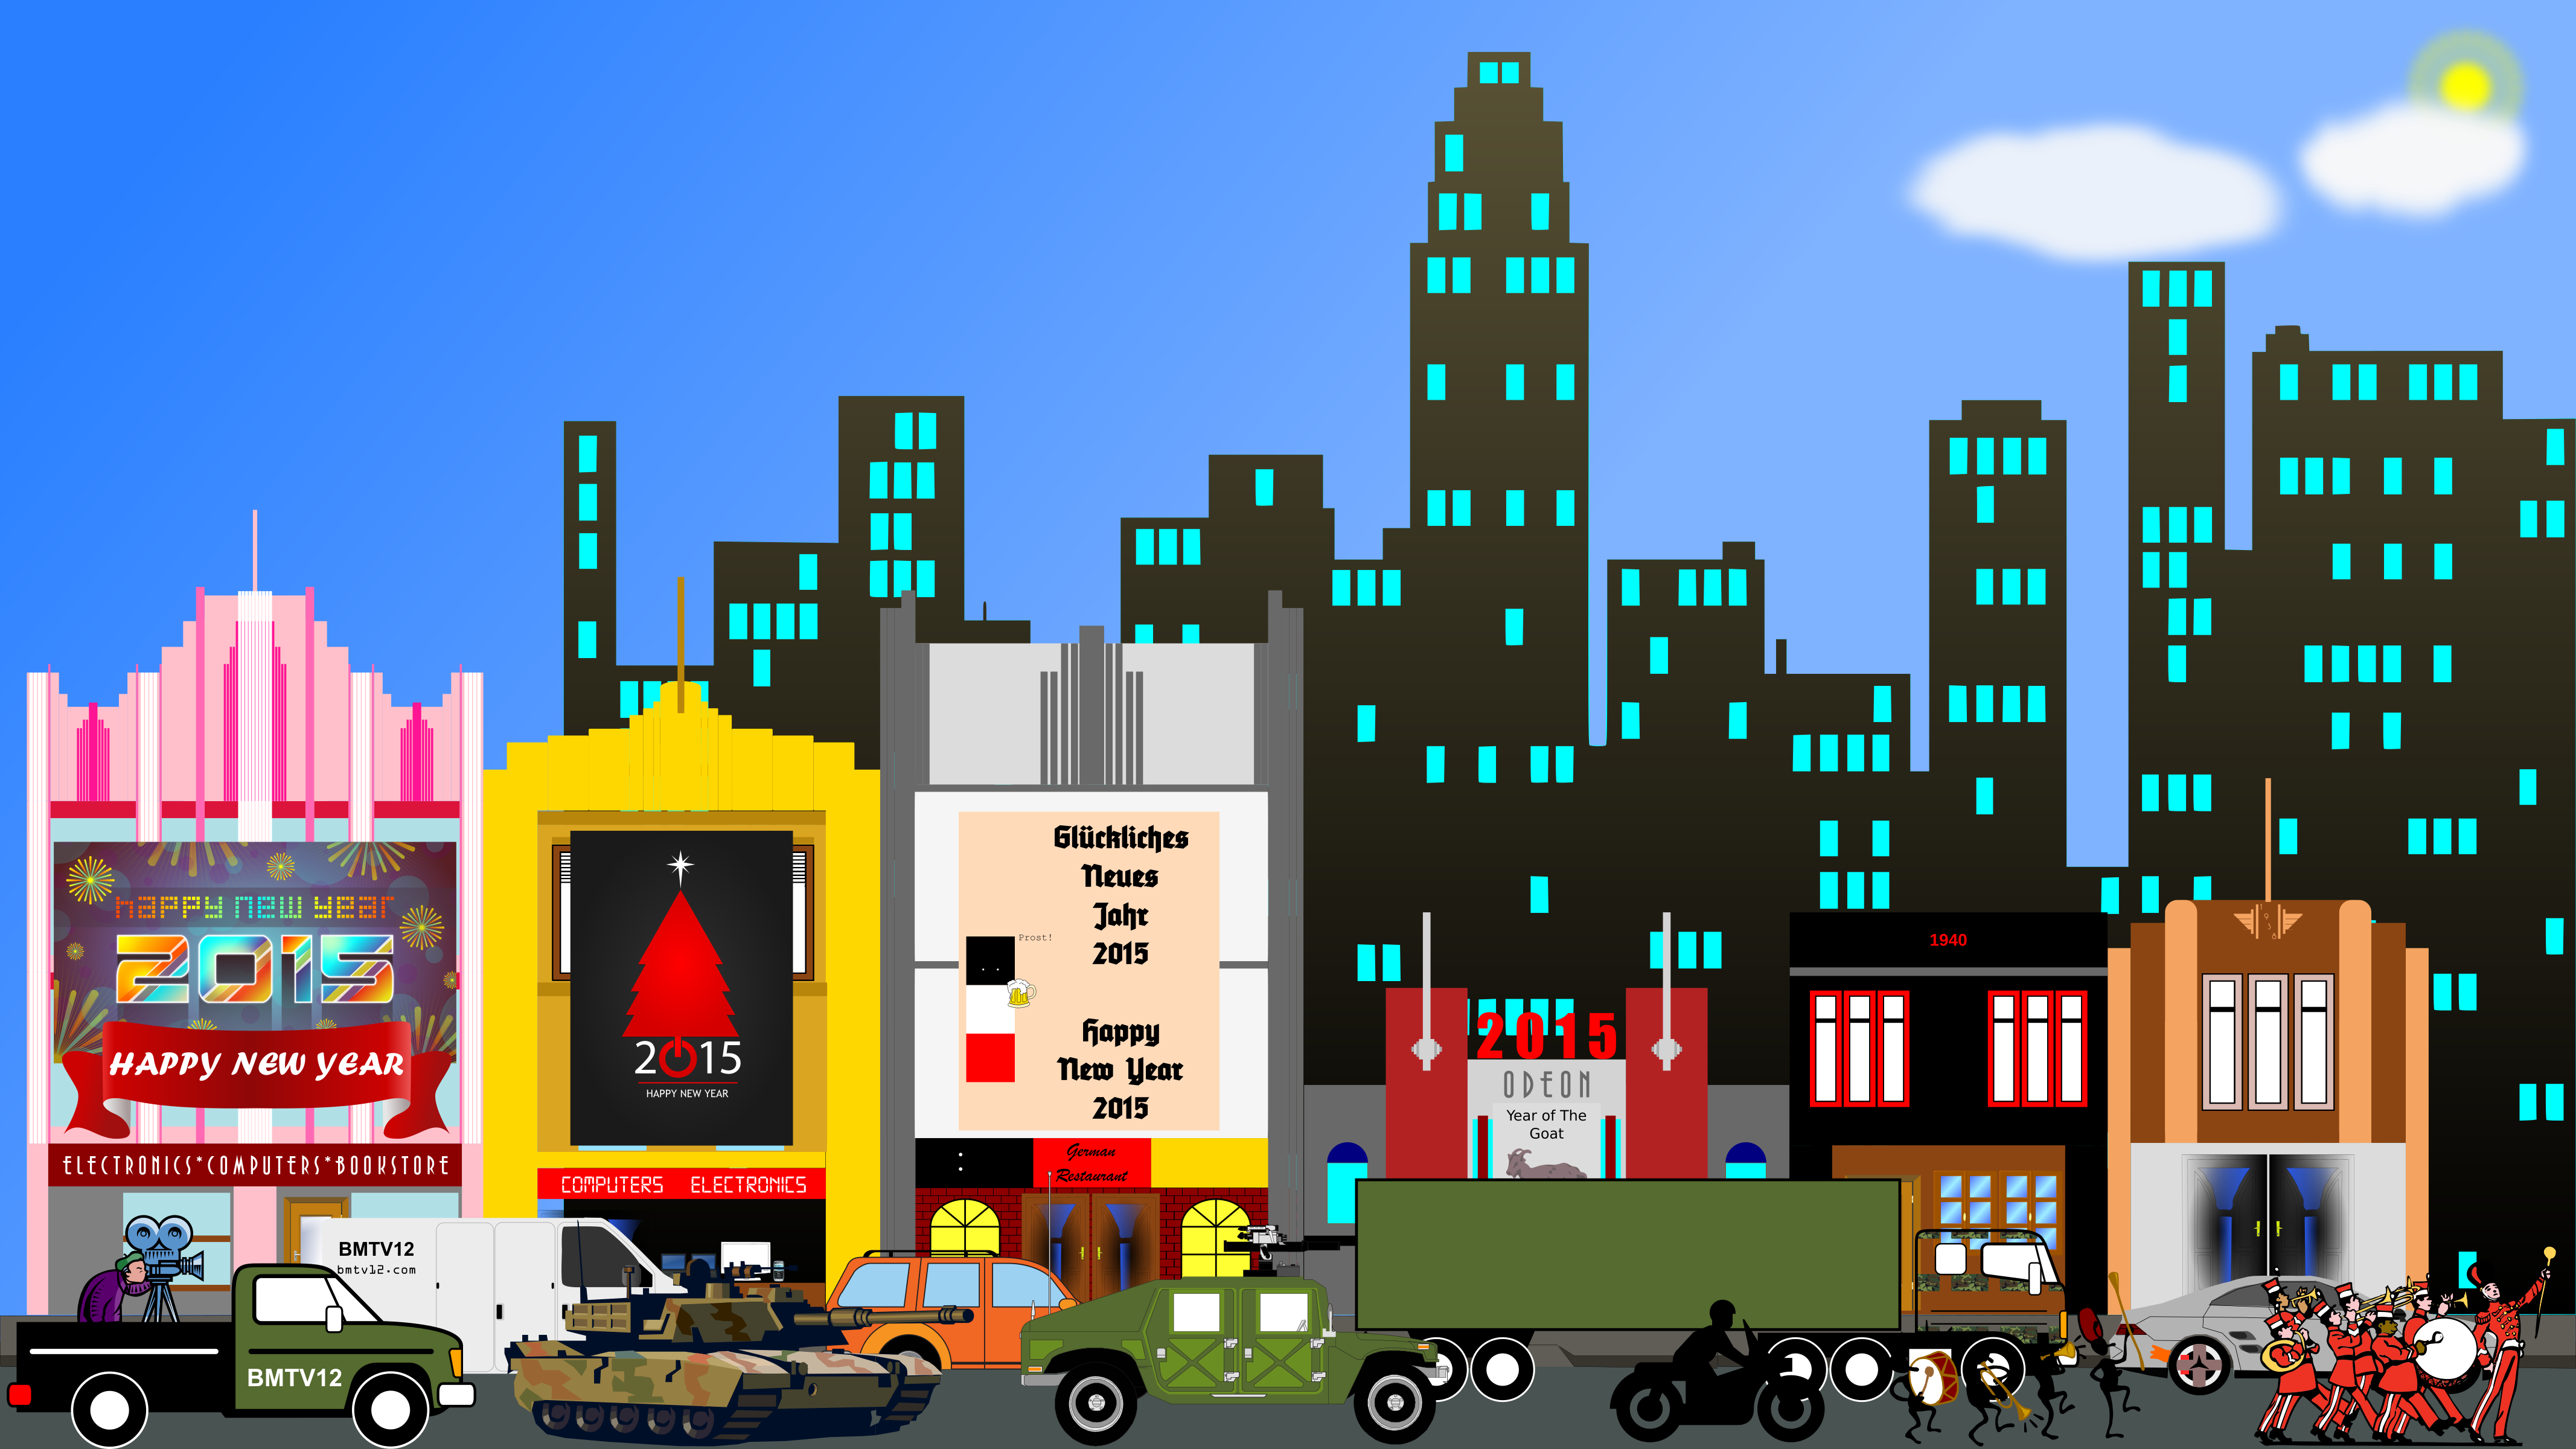 clipart of a city - photo #14